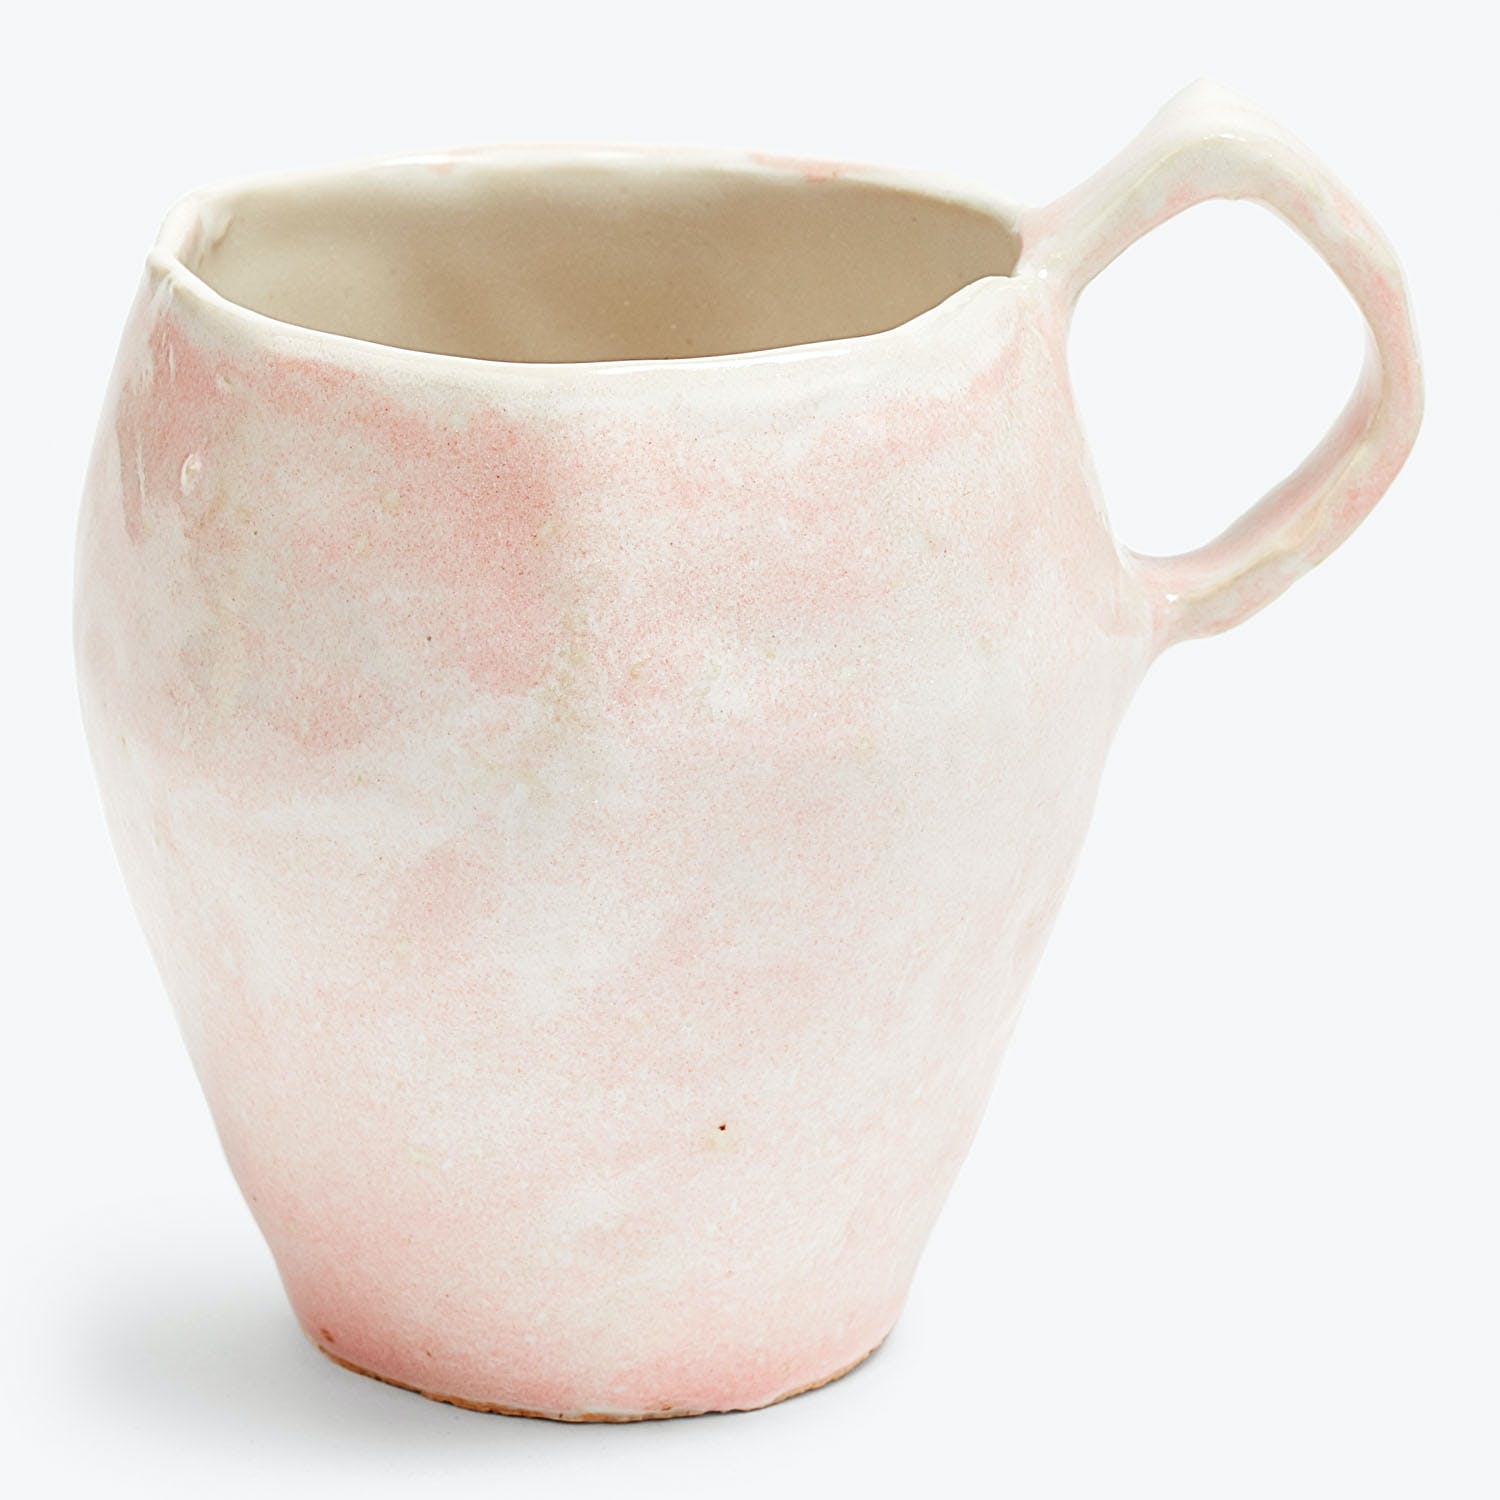 Handcrafted ceramic pitcher in light pink and white marbled design.